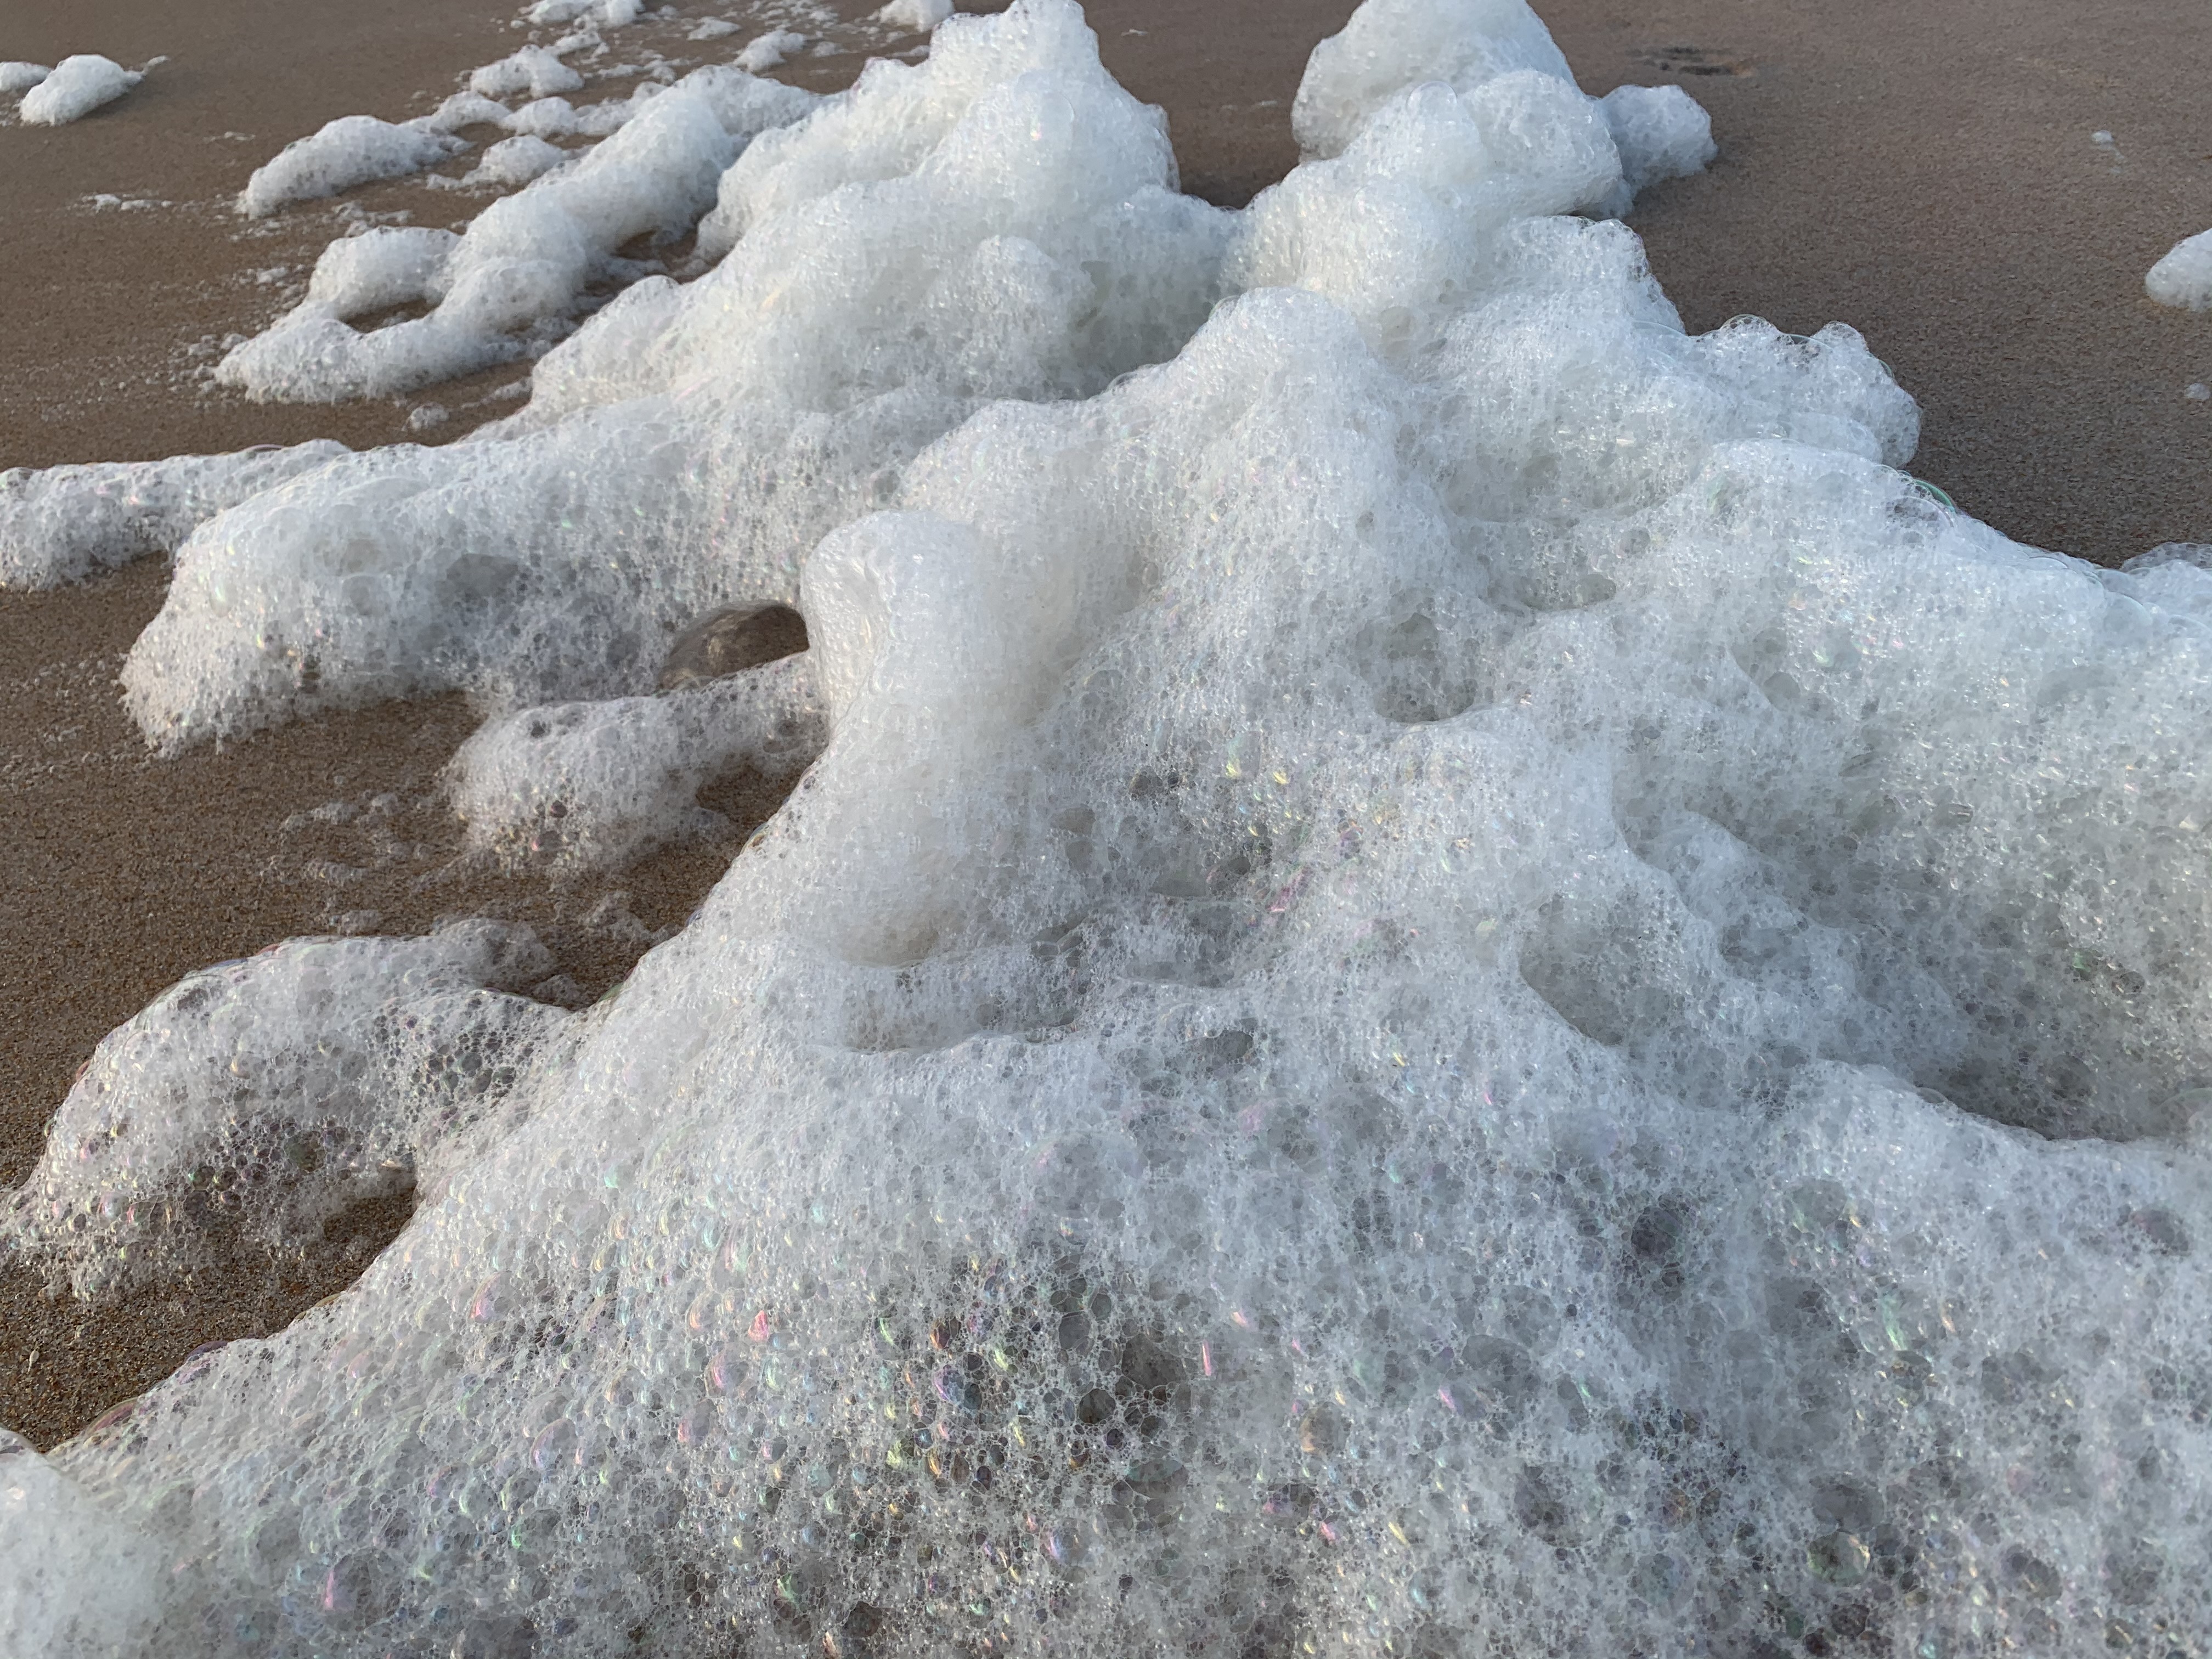 All You Ever Wanted to Know About Sea Foam, But Were Afraid to Ask